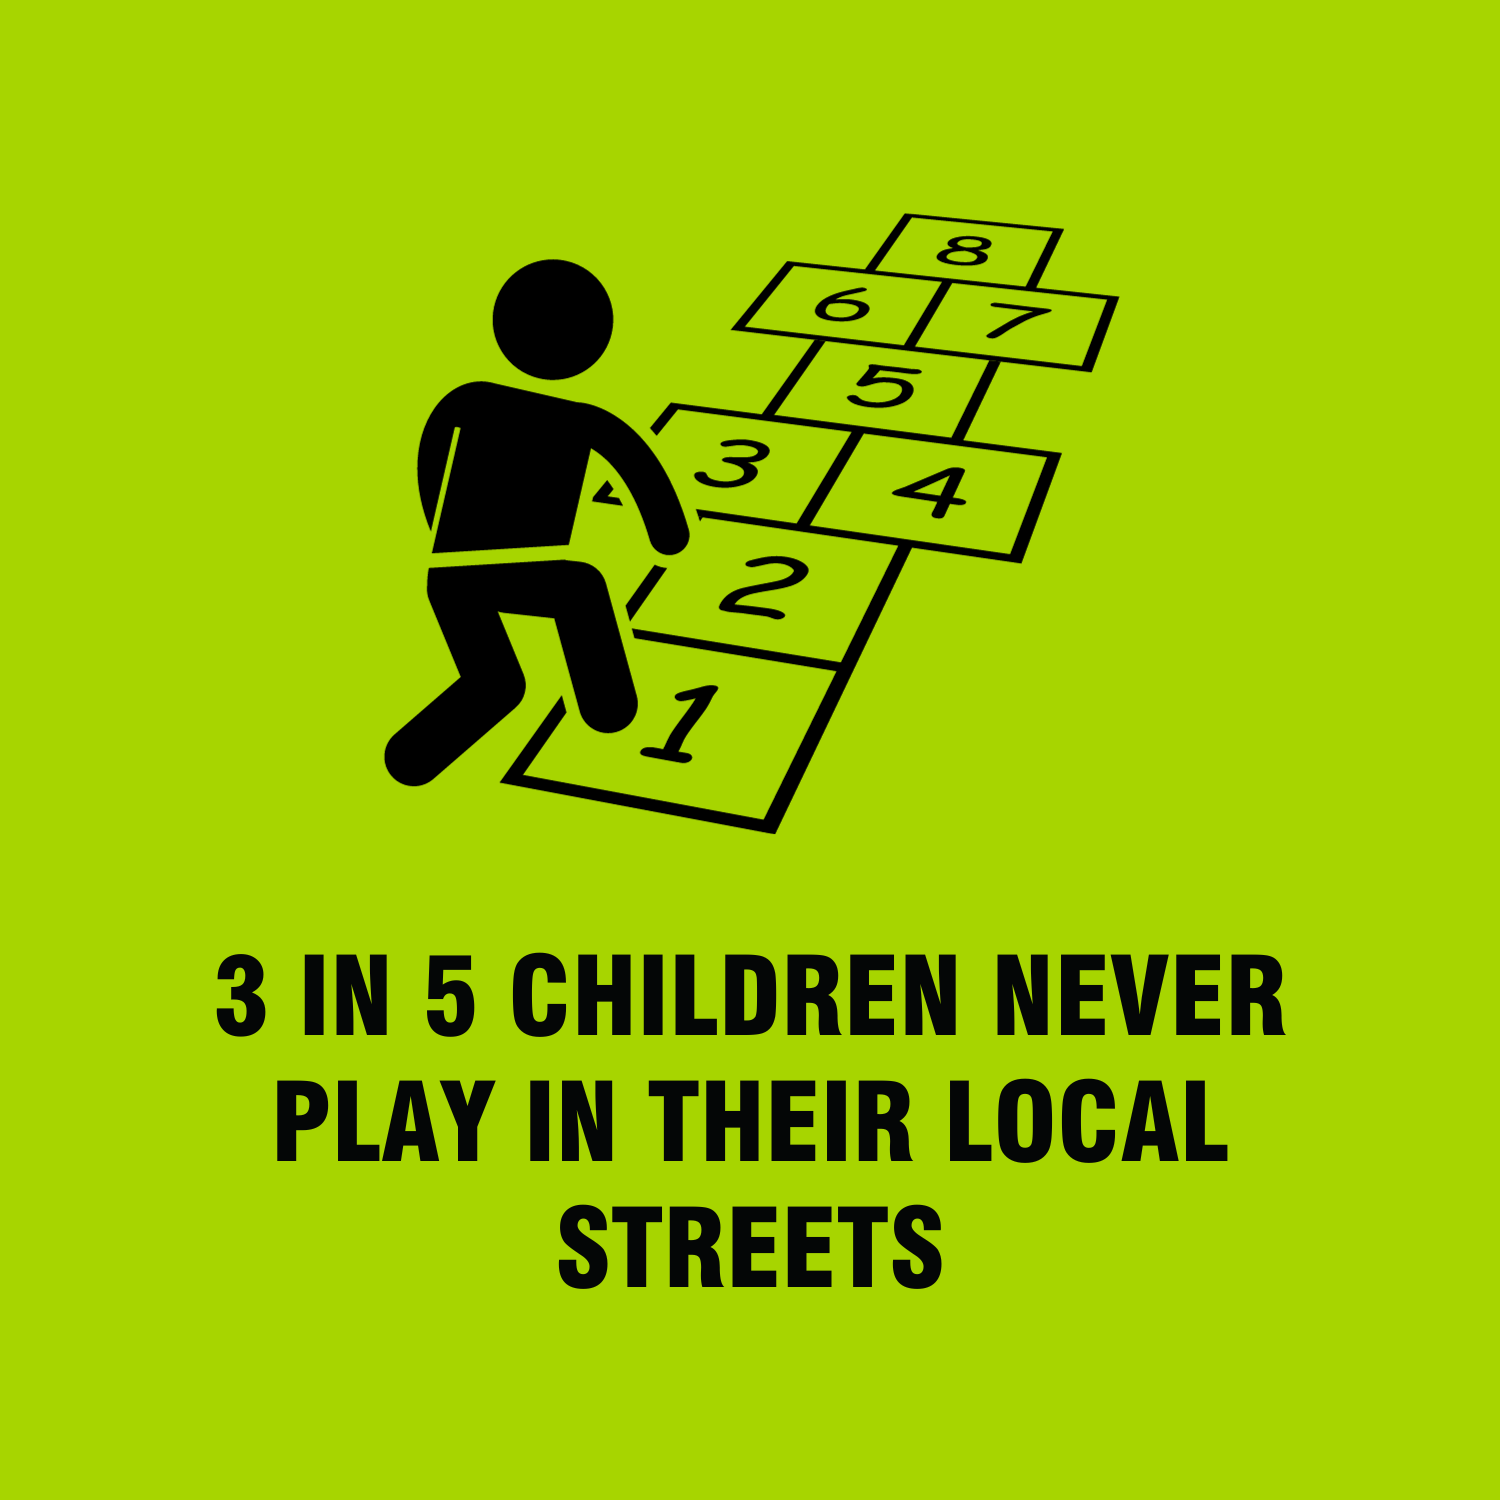 3 in 5 children never play in their local streets